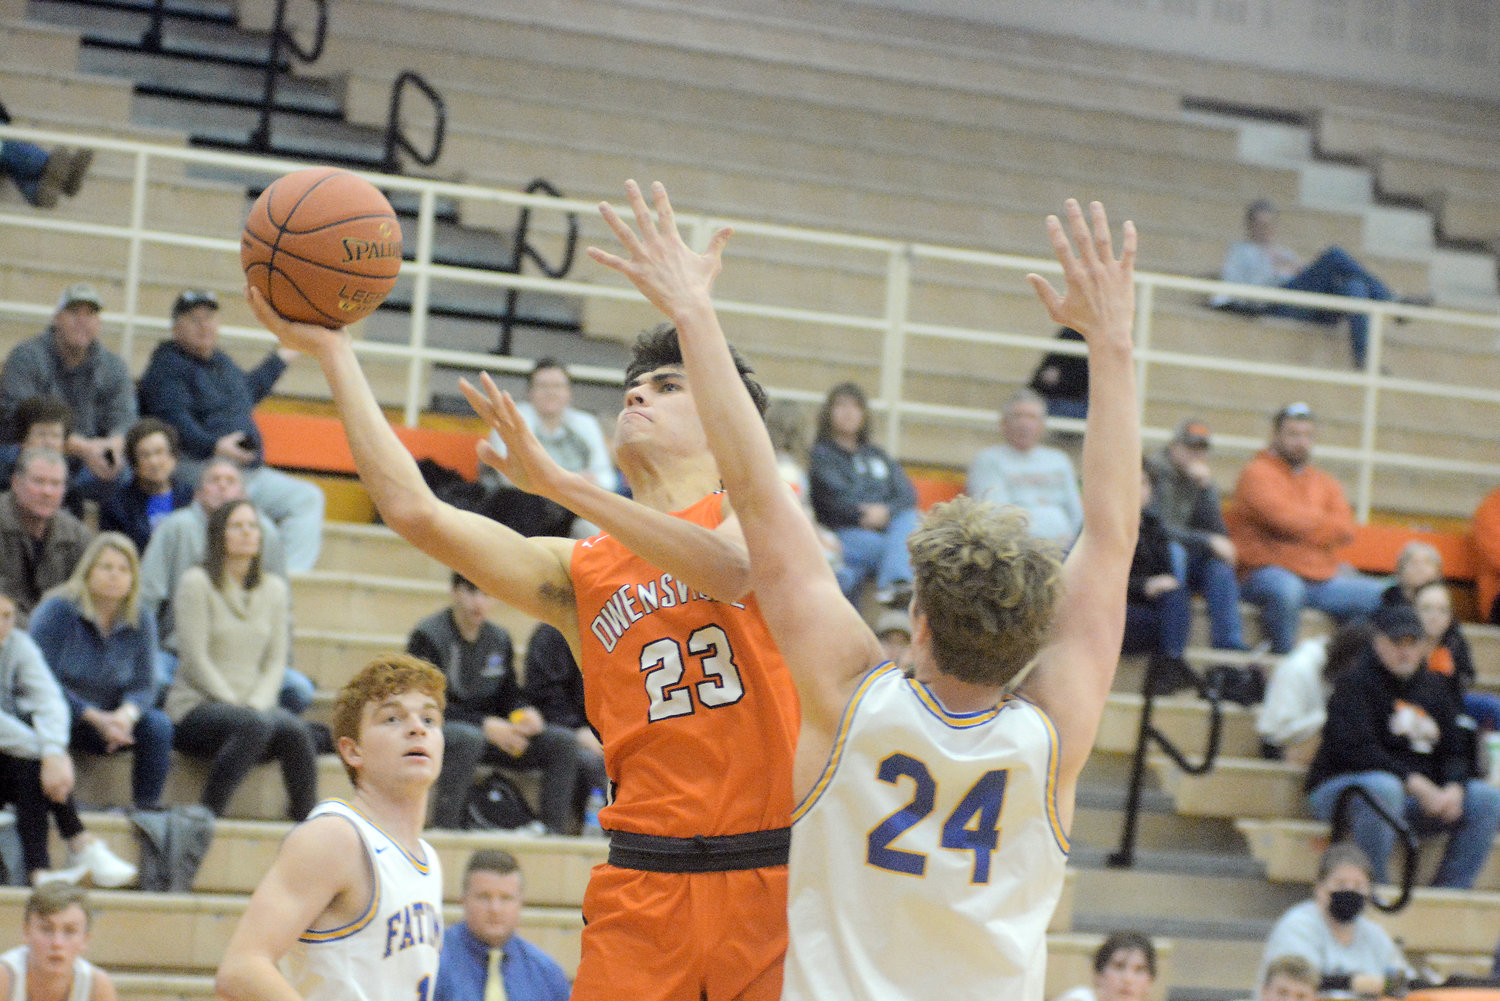 Landon Valley (left) aggressively attacks the basket against the Comet defense.